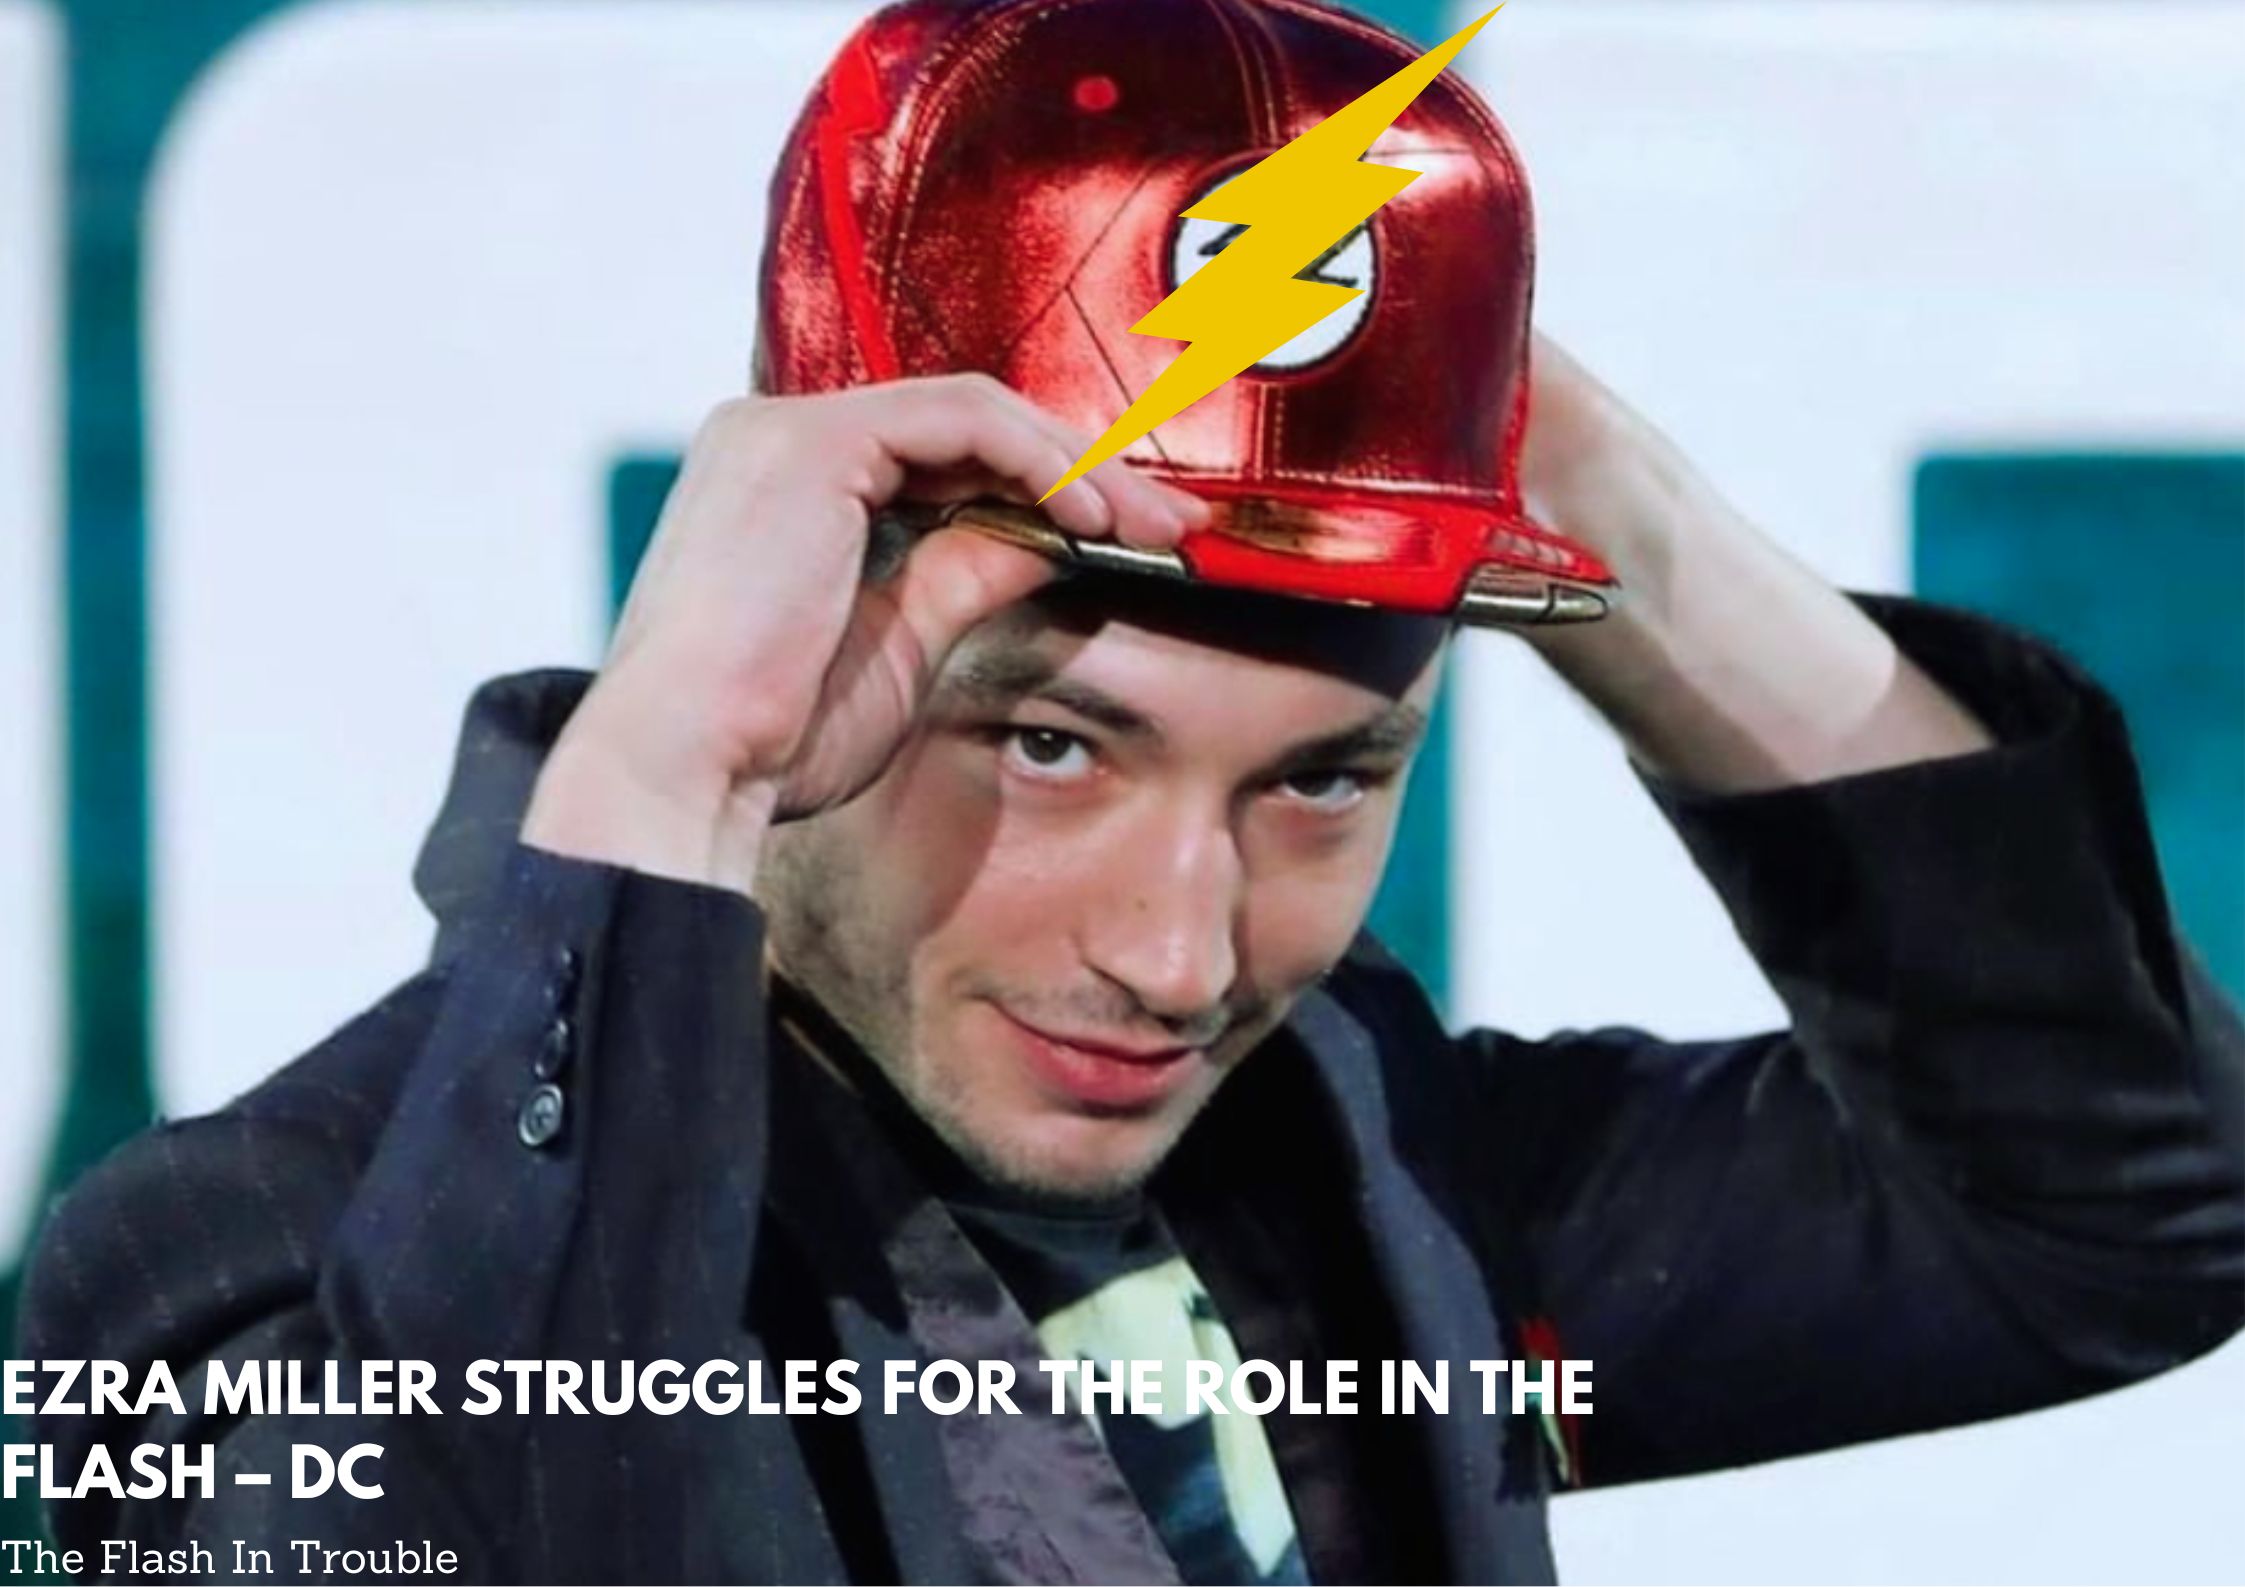 Ezra Miller struggles for role in The Flash – DC having second though about release 1